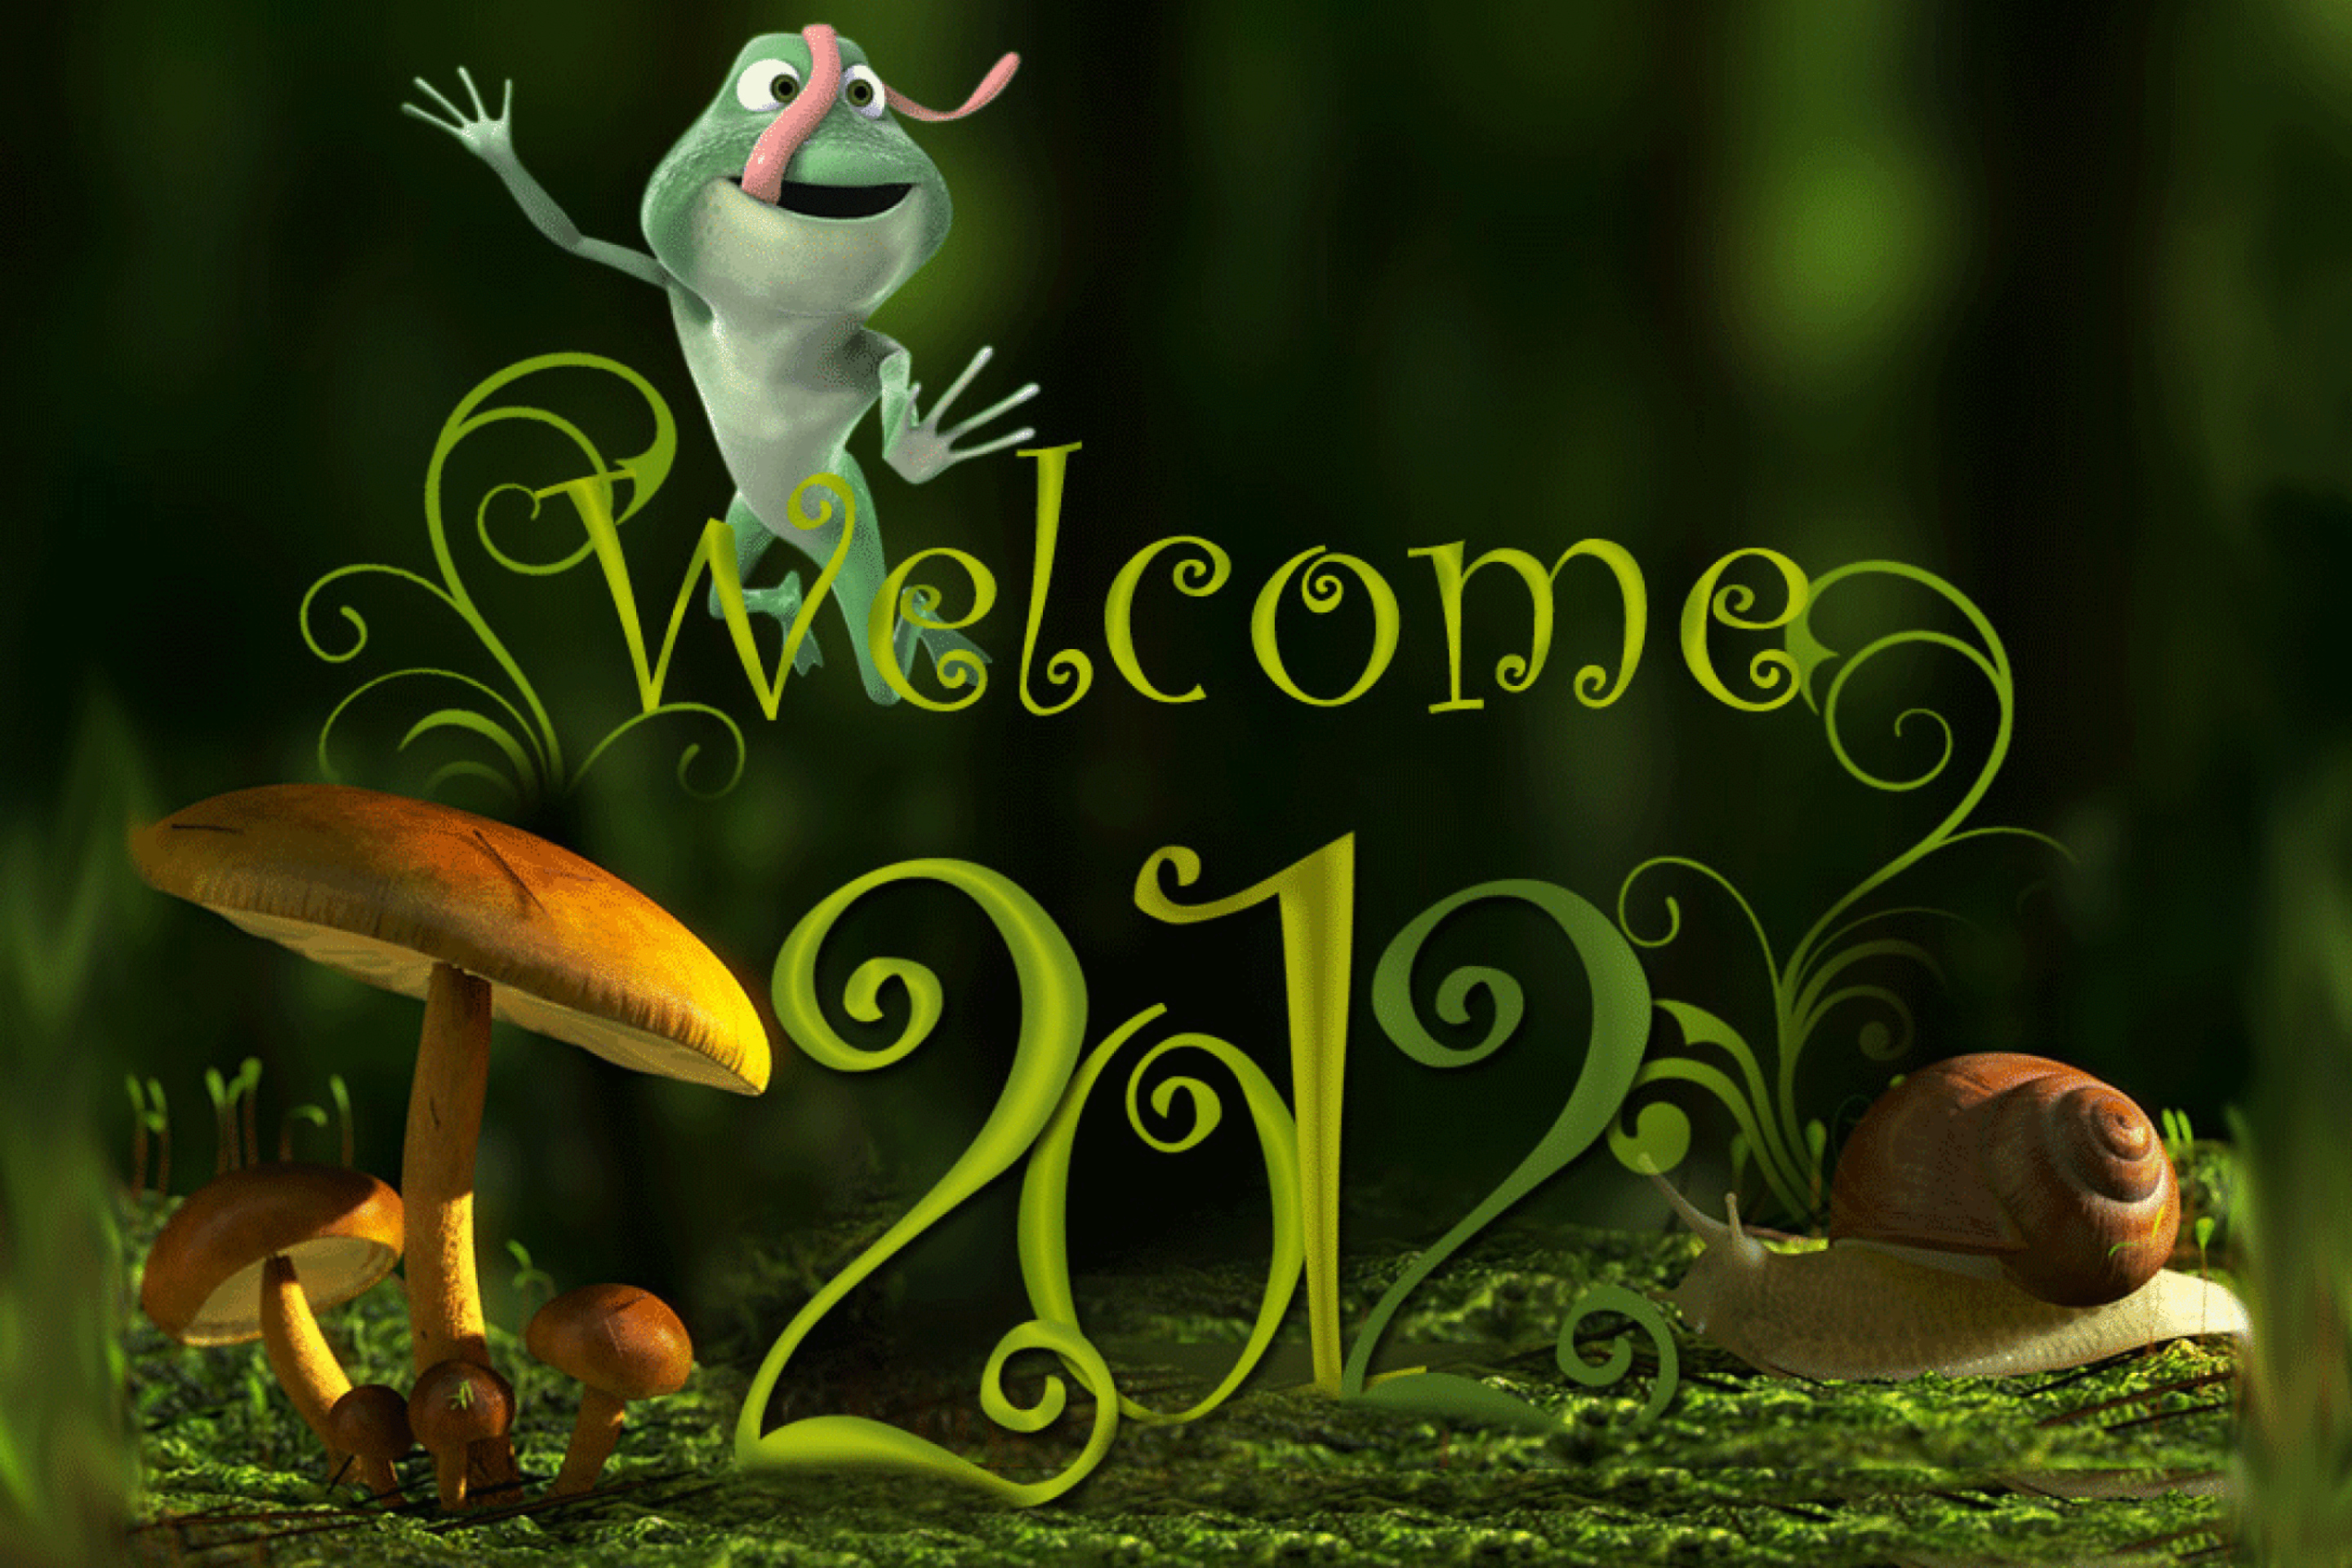 Welcome New Year 2012 wallpaper 2880x1920